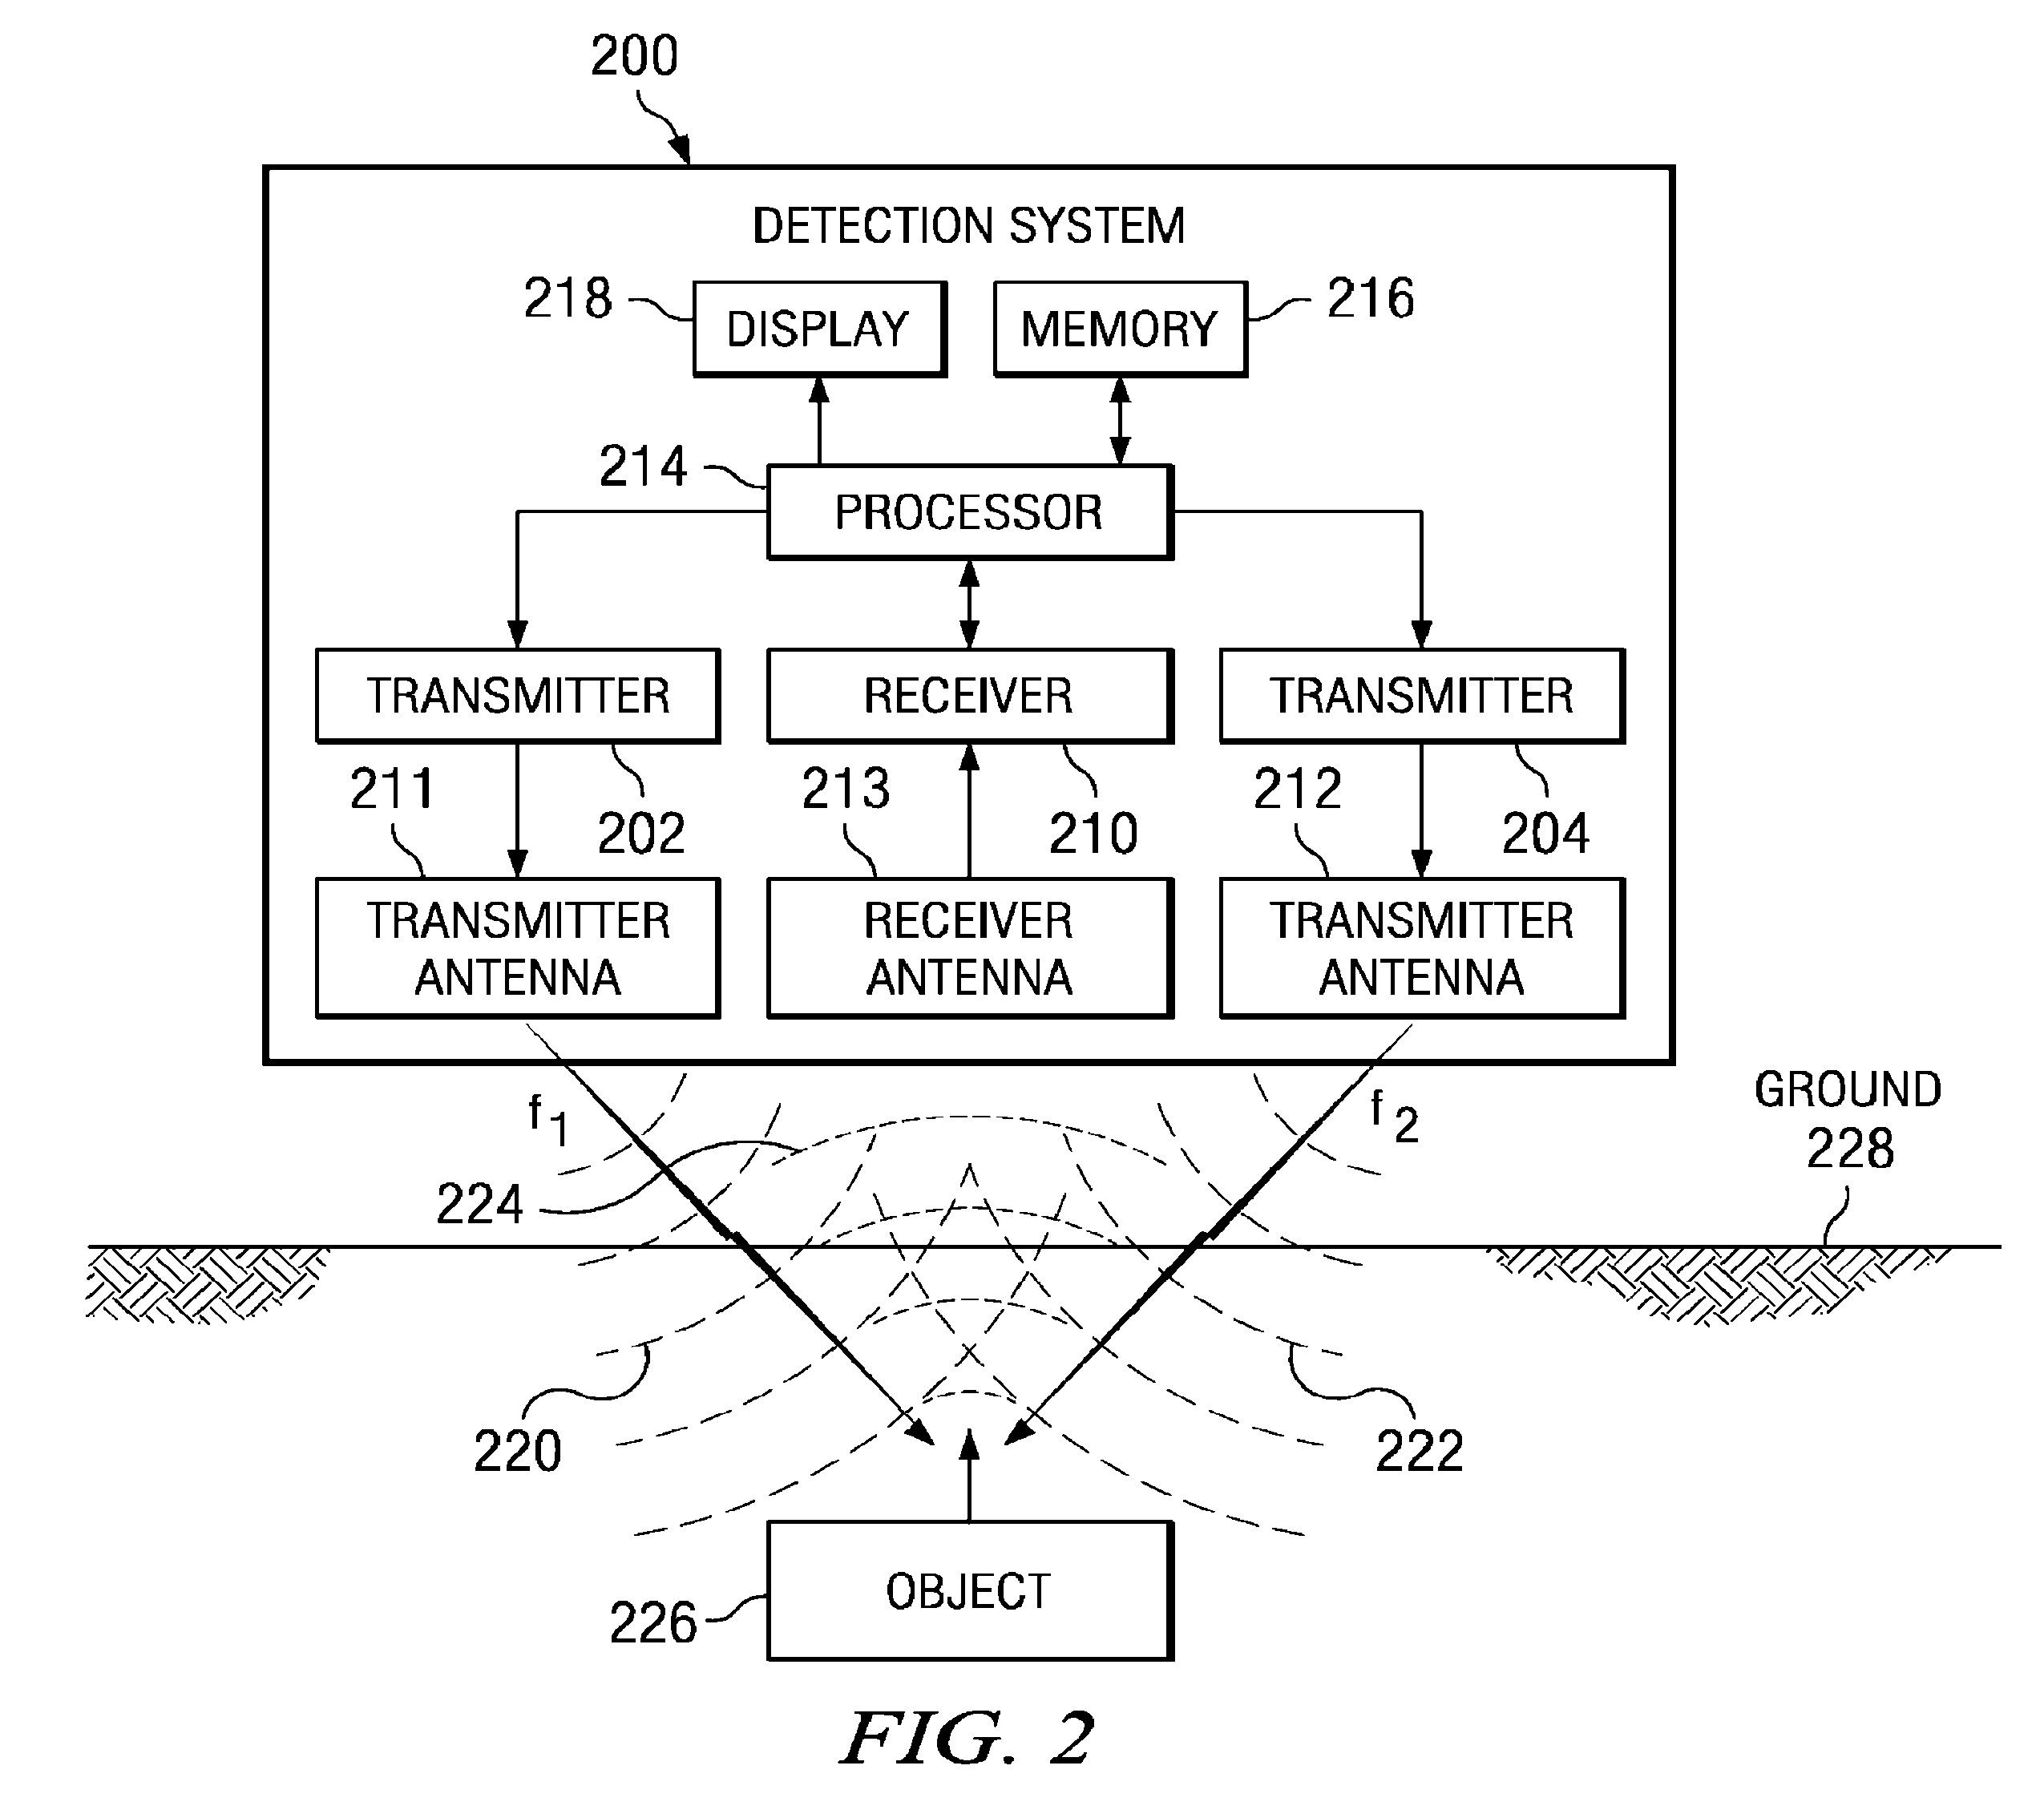 Method and apparatus for using collimated and linearly polarized millimeter wave beams at Brewster's angle of incidence in ground penetrating radar to detect objects located in the ground